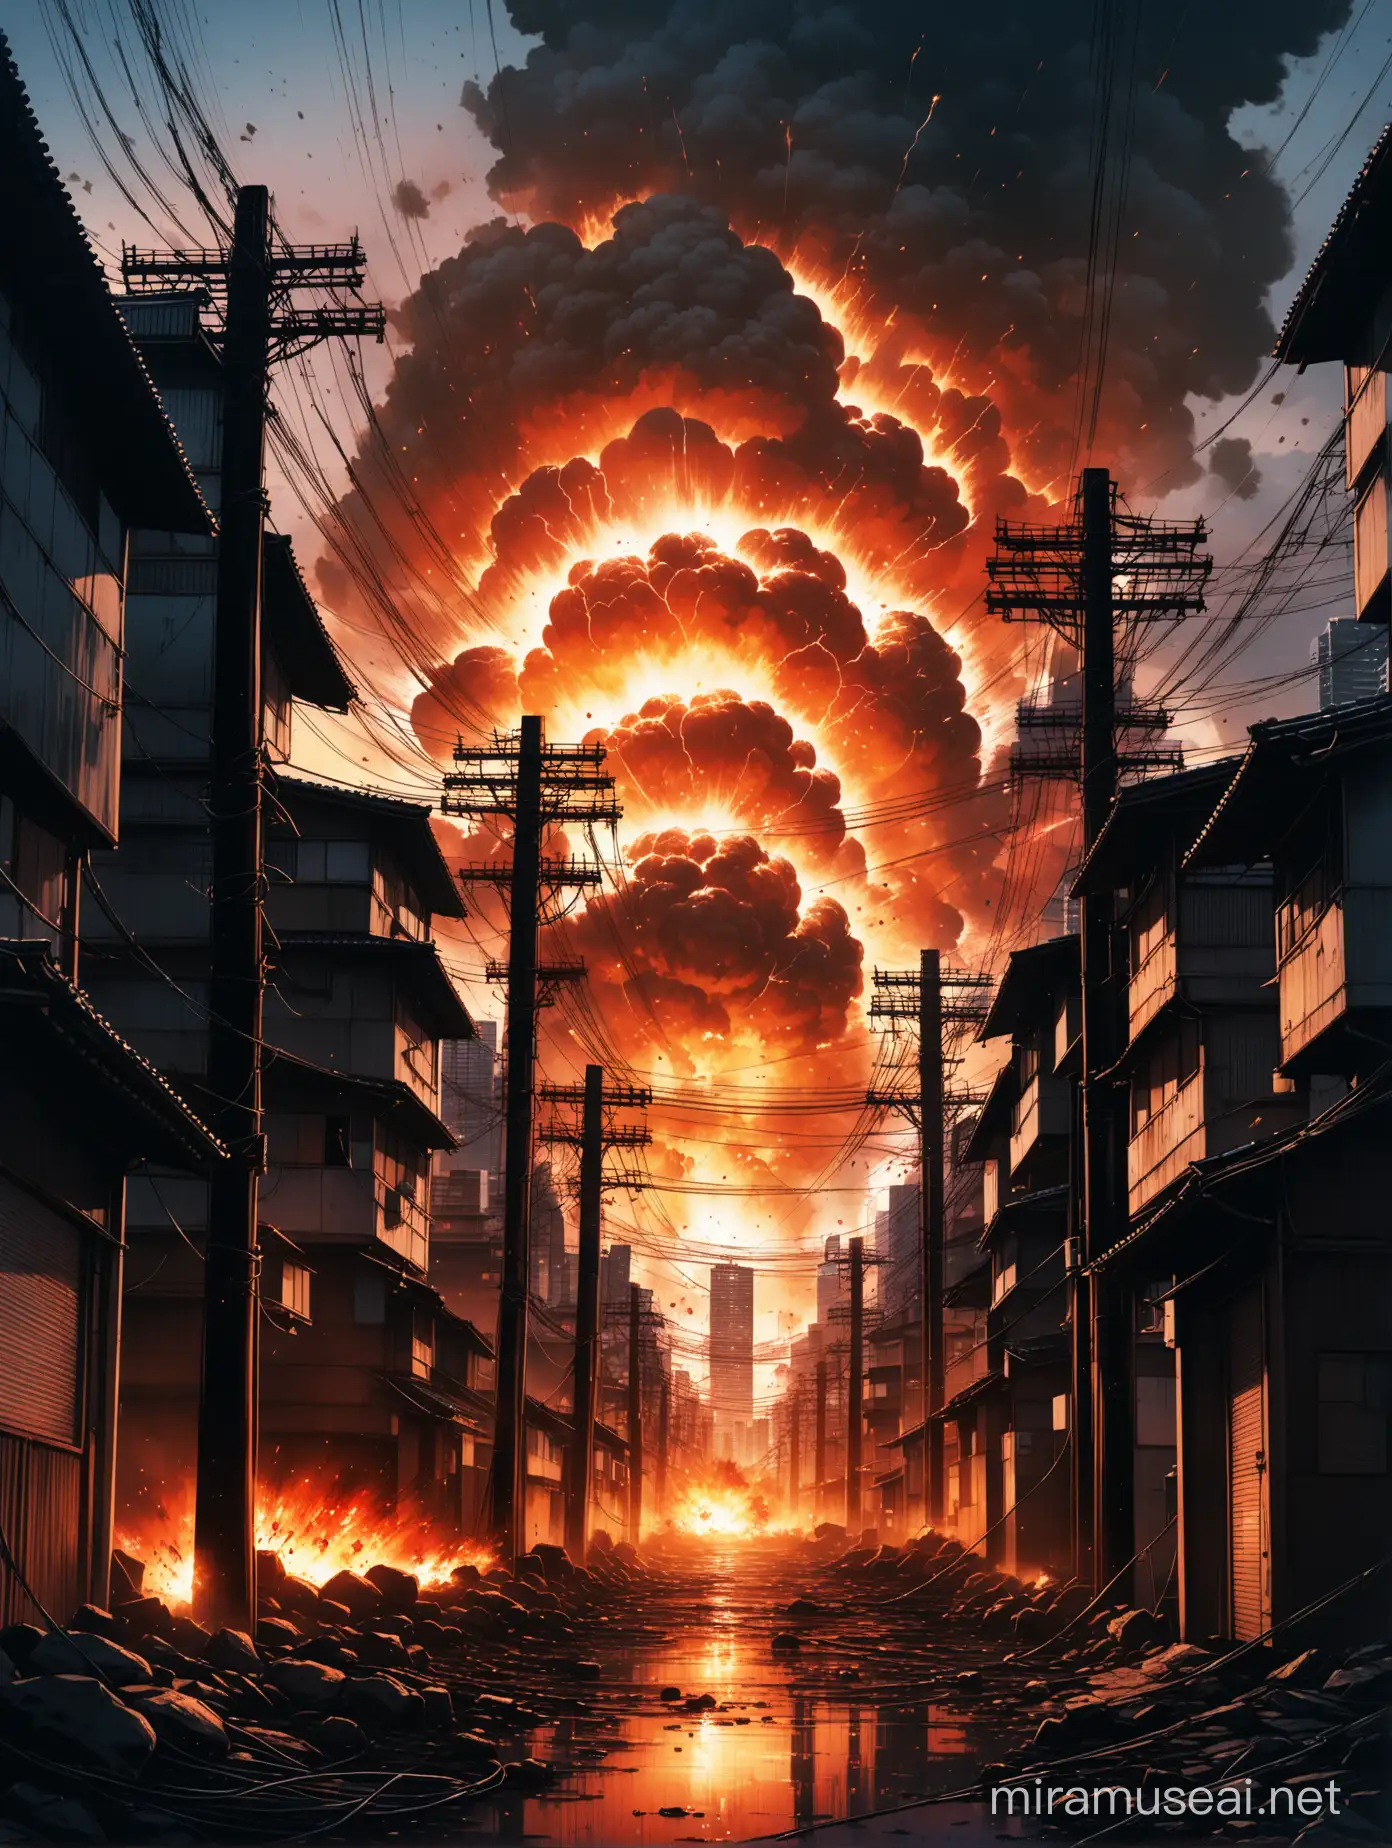 A movie poster background showing slum buildings, Tokyo skyscrapers, electricity poles, an explosion, and blood